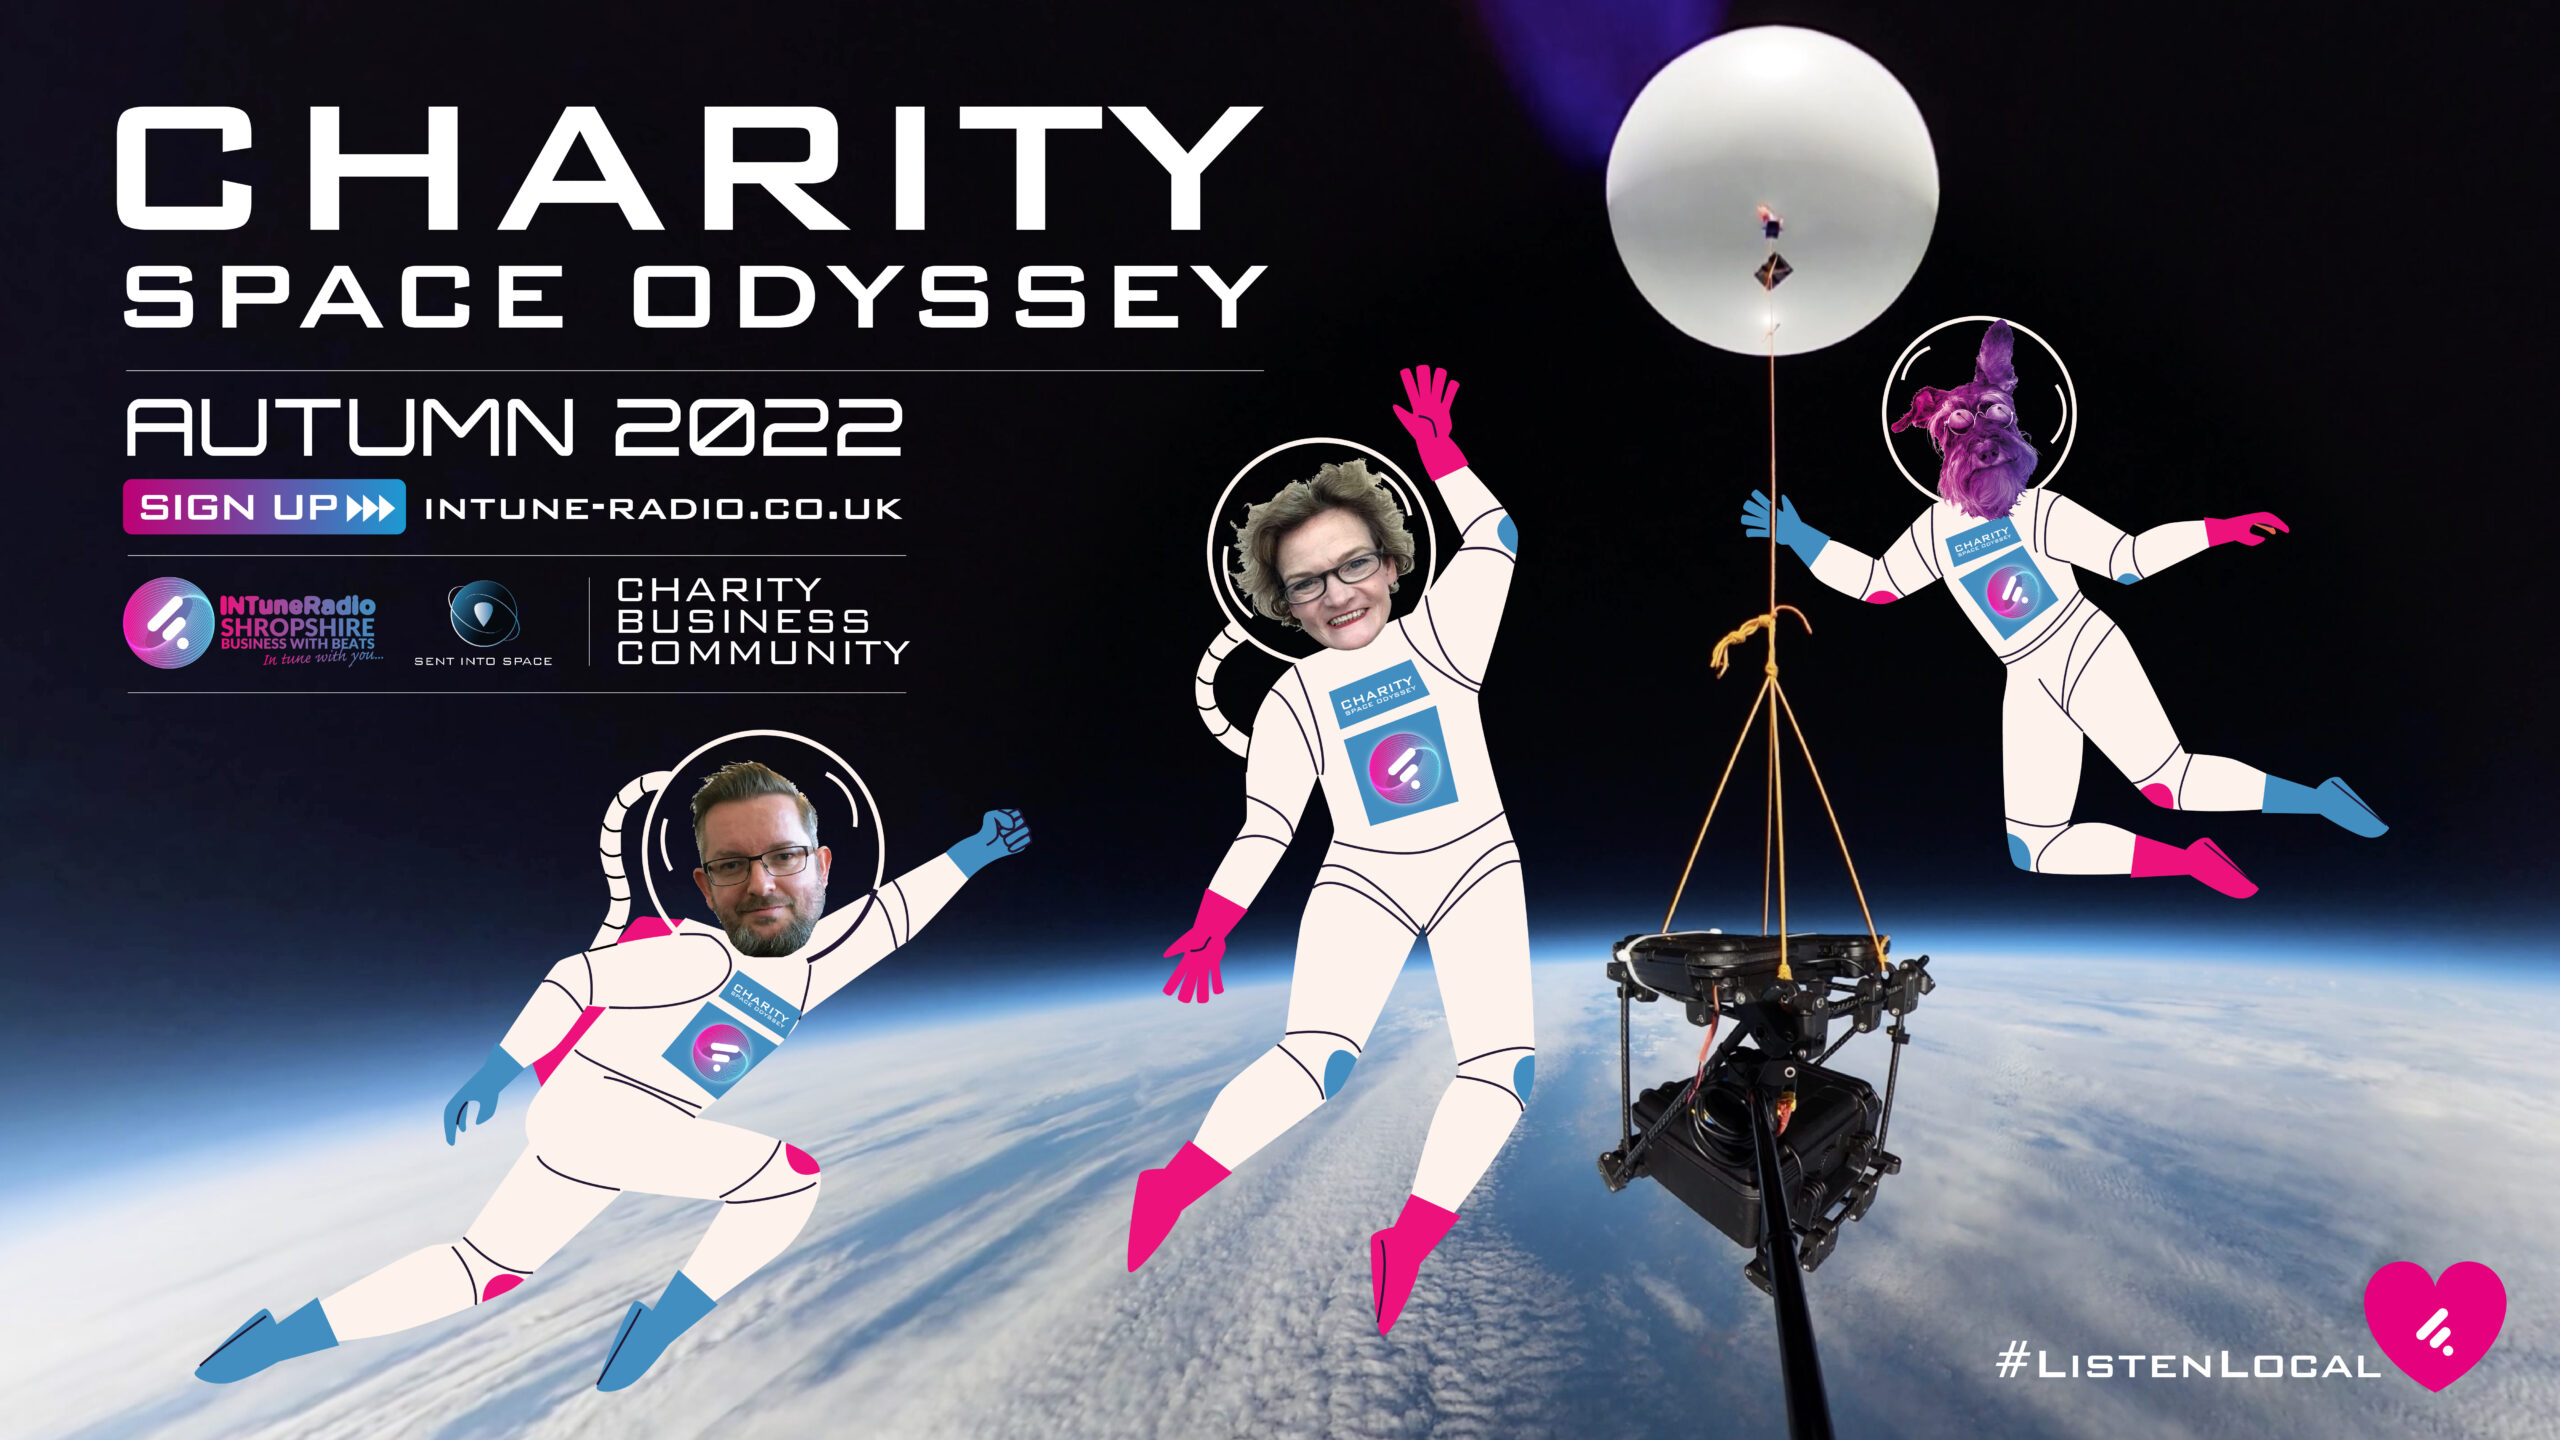 Charity Space Odyssey